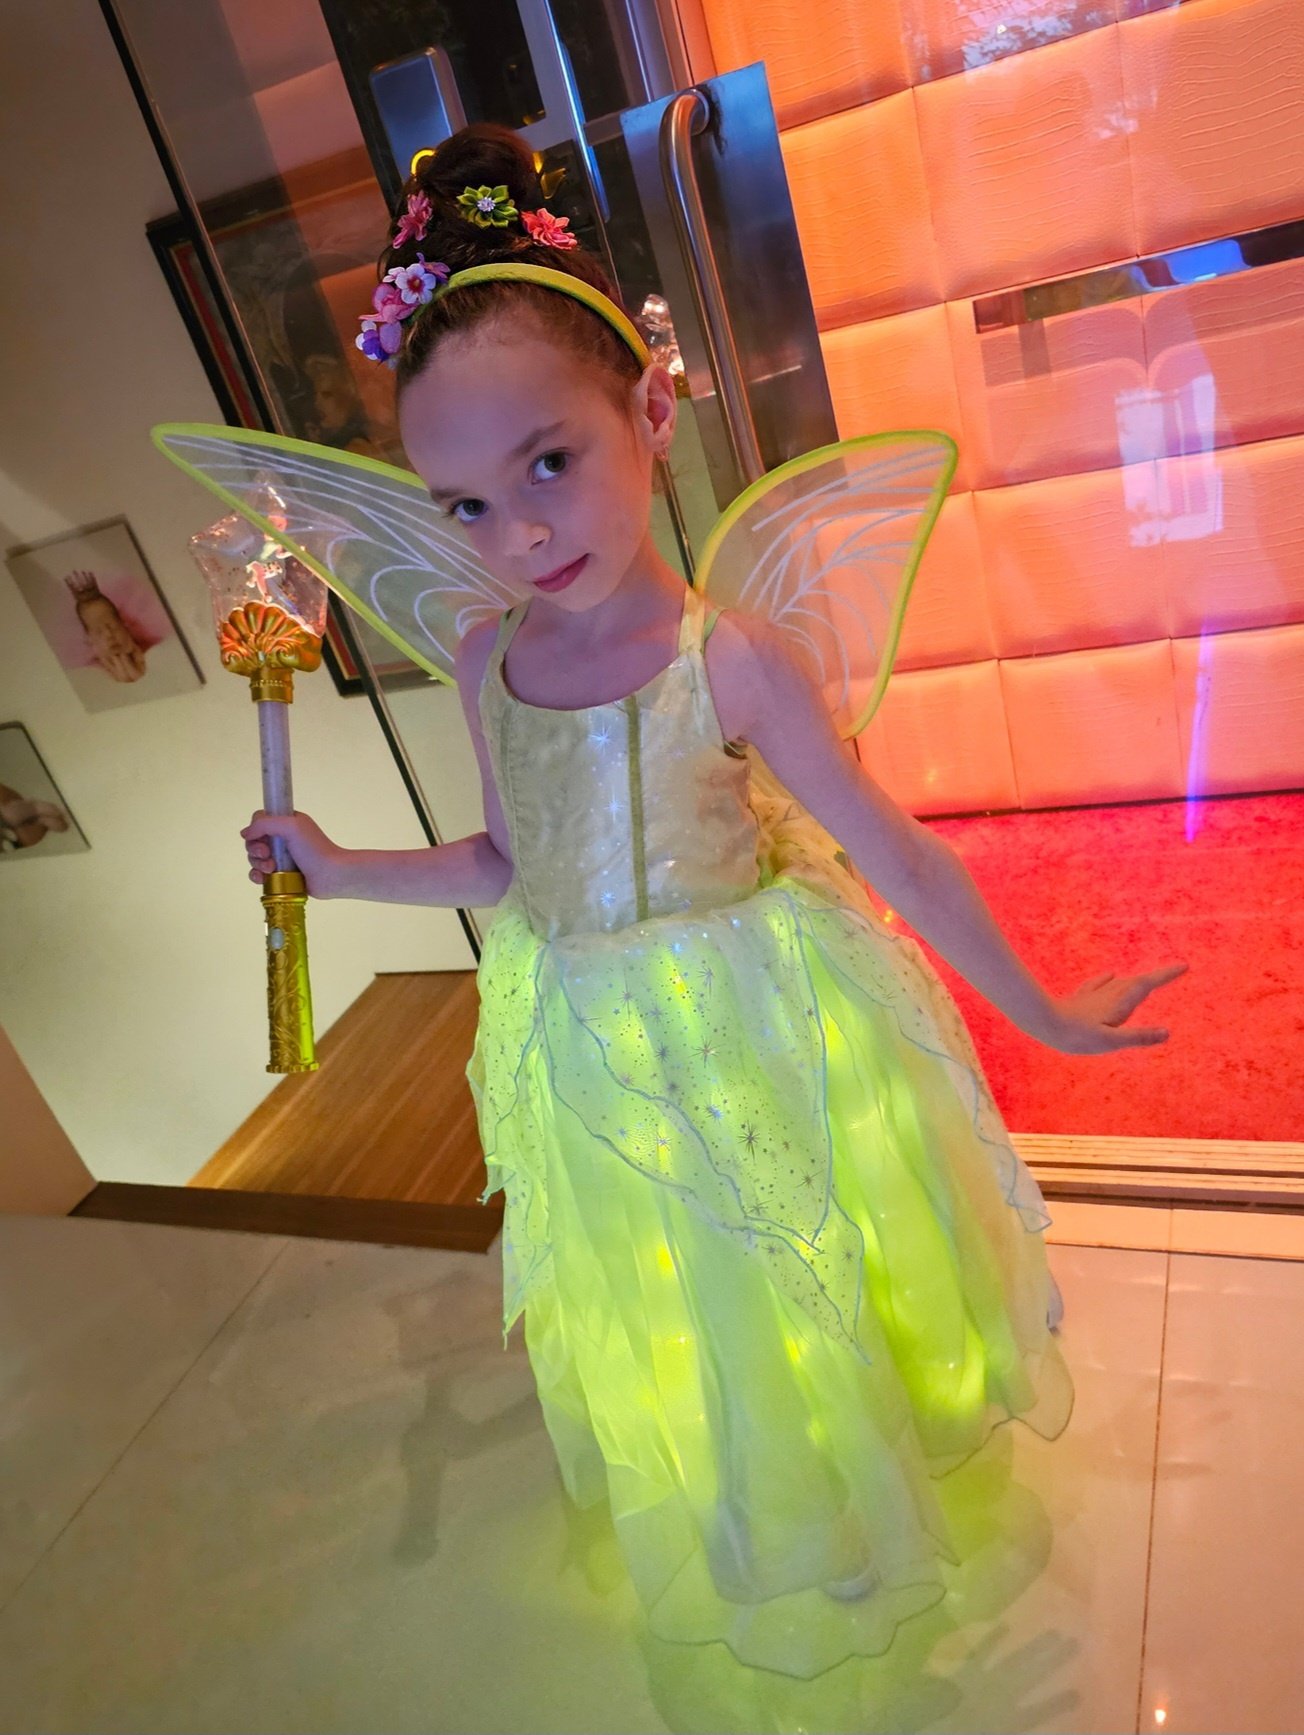 Coco Austin's Daughter Chanel Has 5 Halloween Costumes